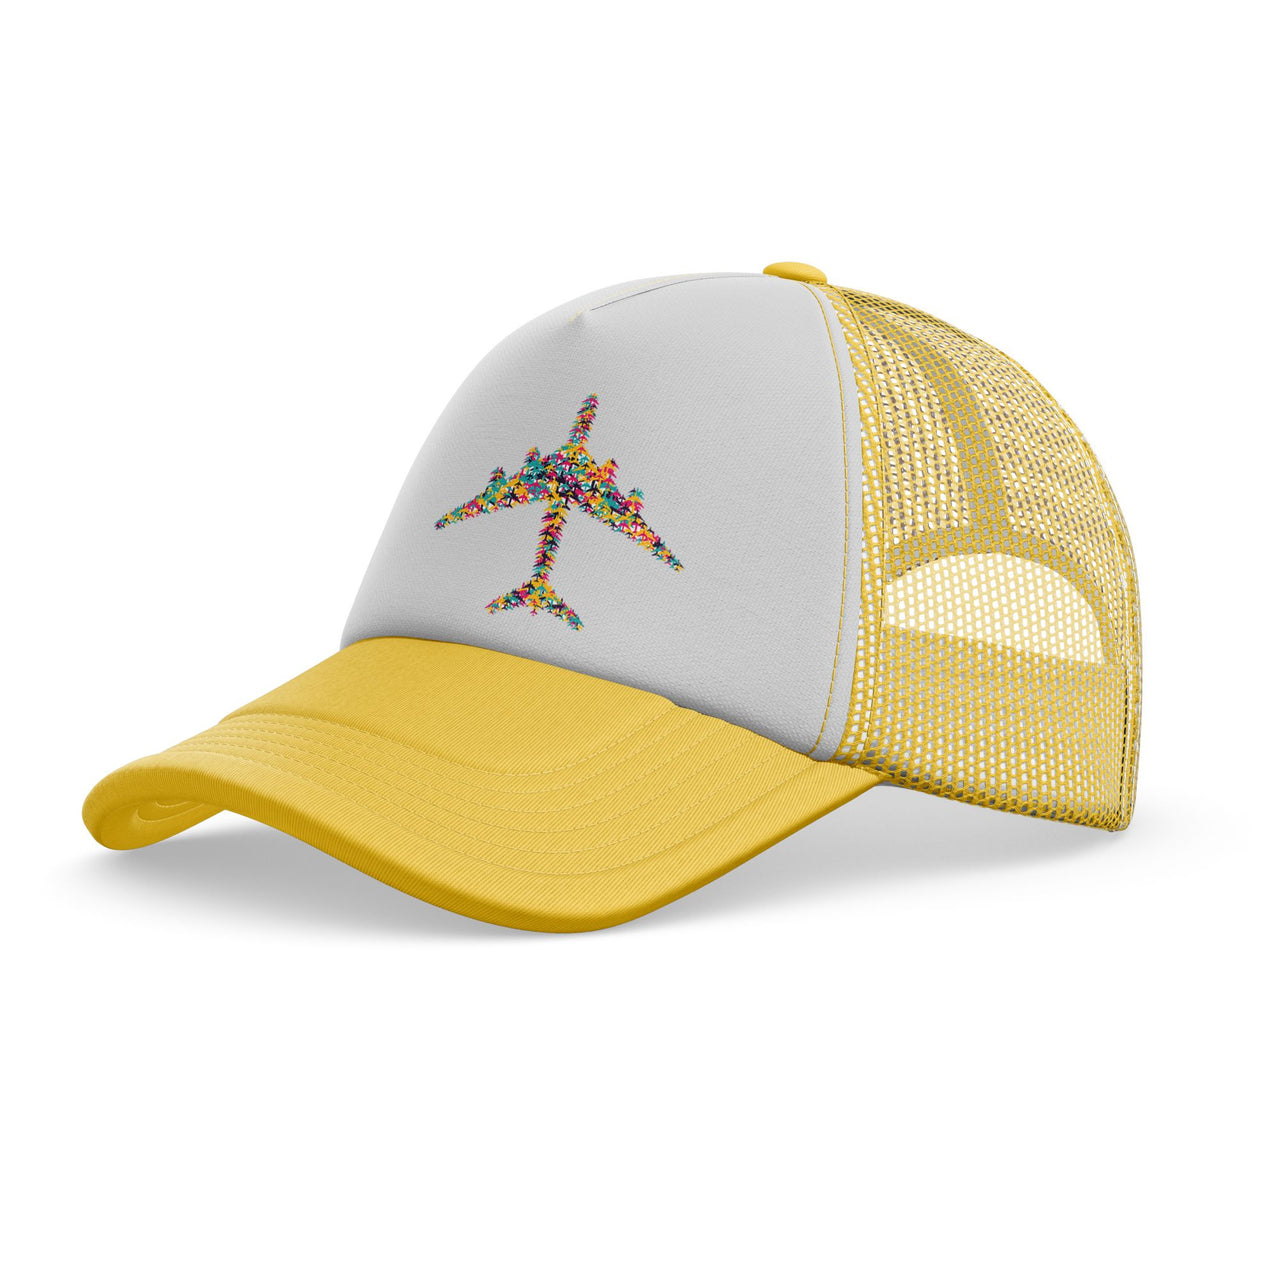 Colourful Airplane Designed Trucker Caps & Hats